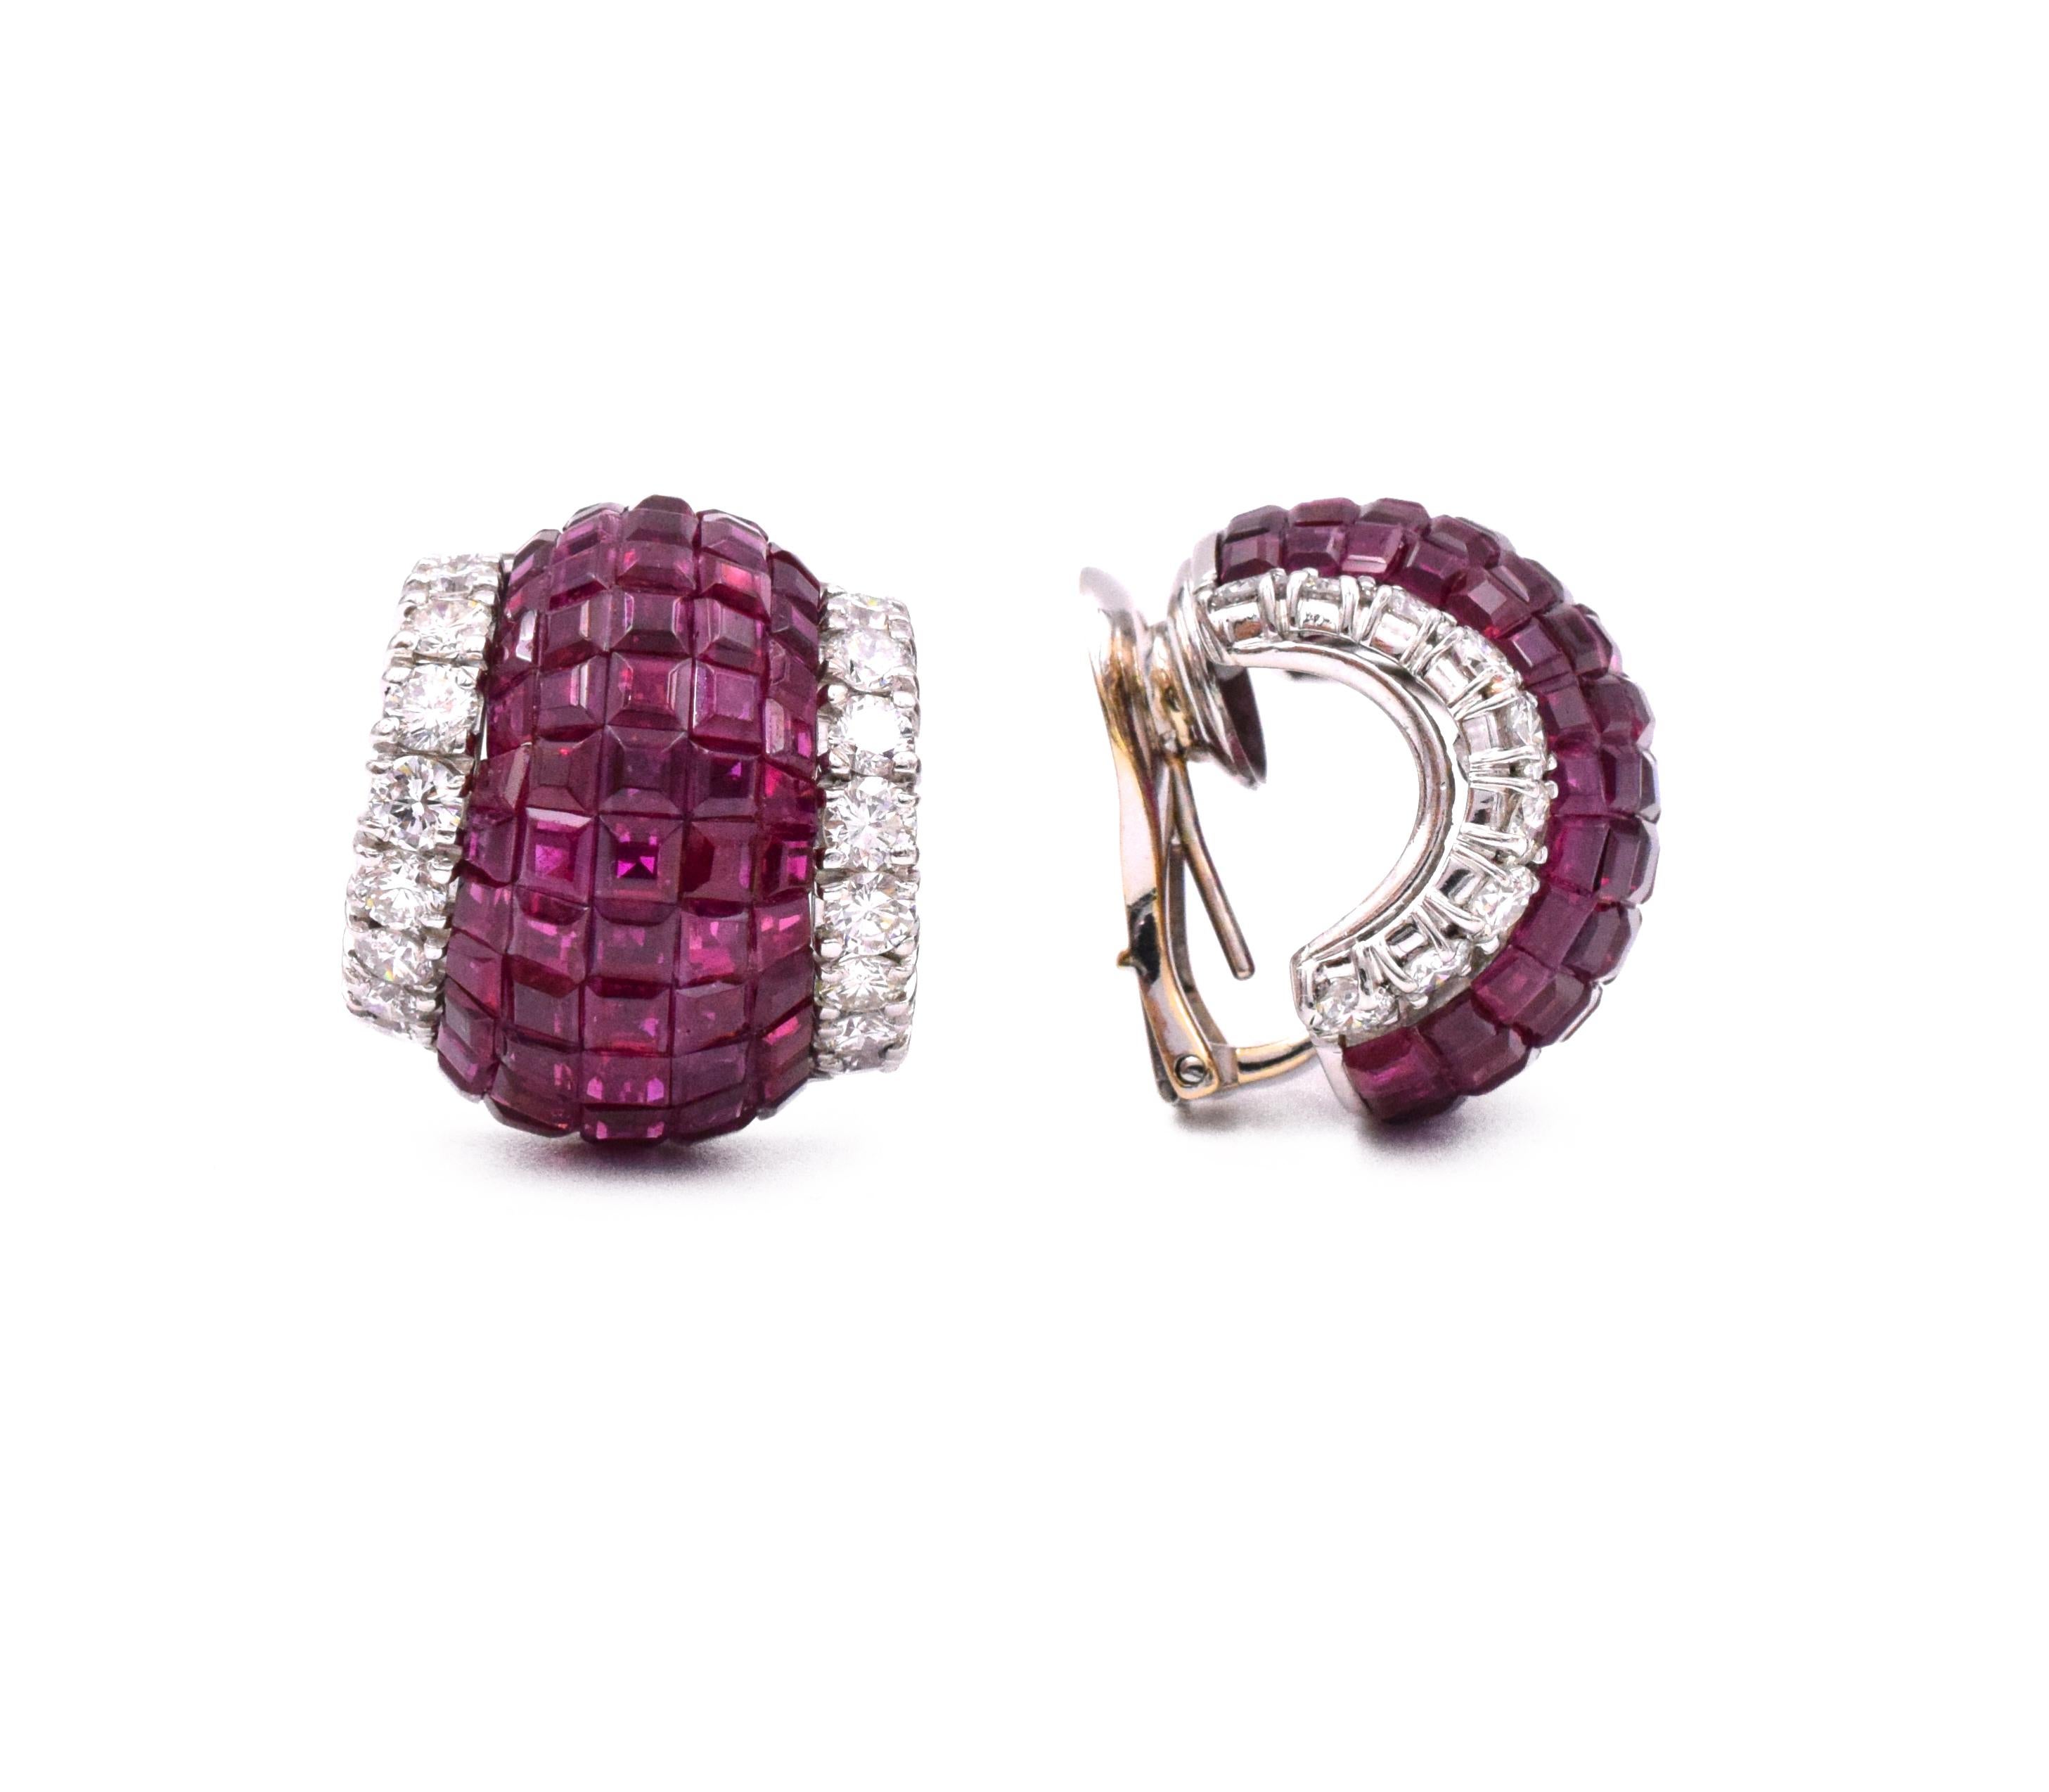 Square Cut Invisibly-Set Ruby and Diamond Earclips by Aletto Brothers